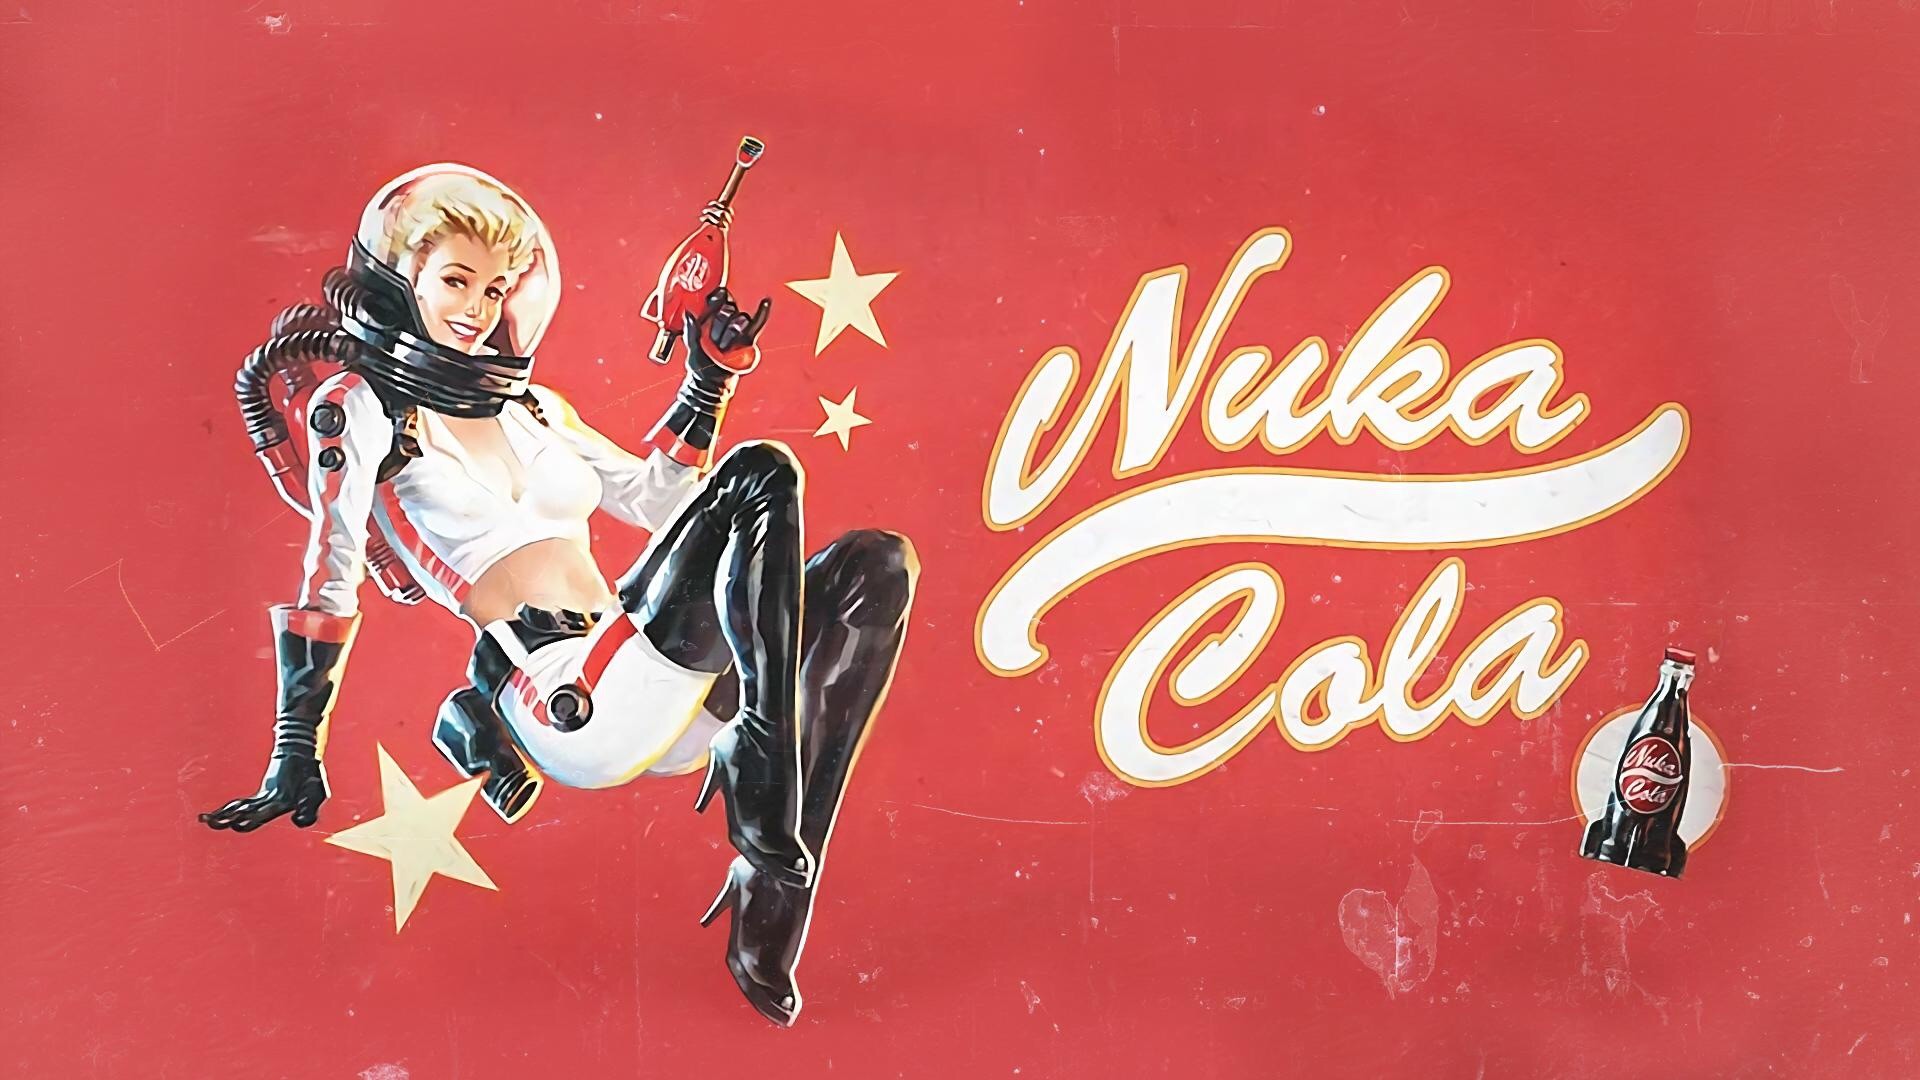 Nuka Cola Vintage Fallout Fallout 4 Video Games 1920x1080